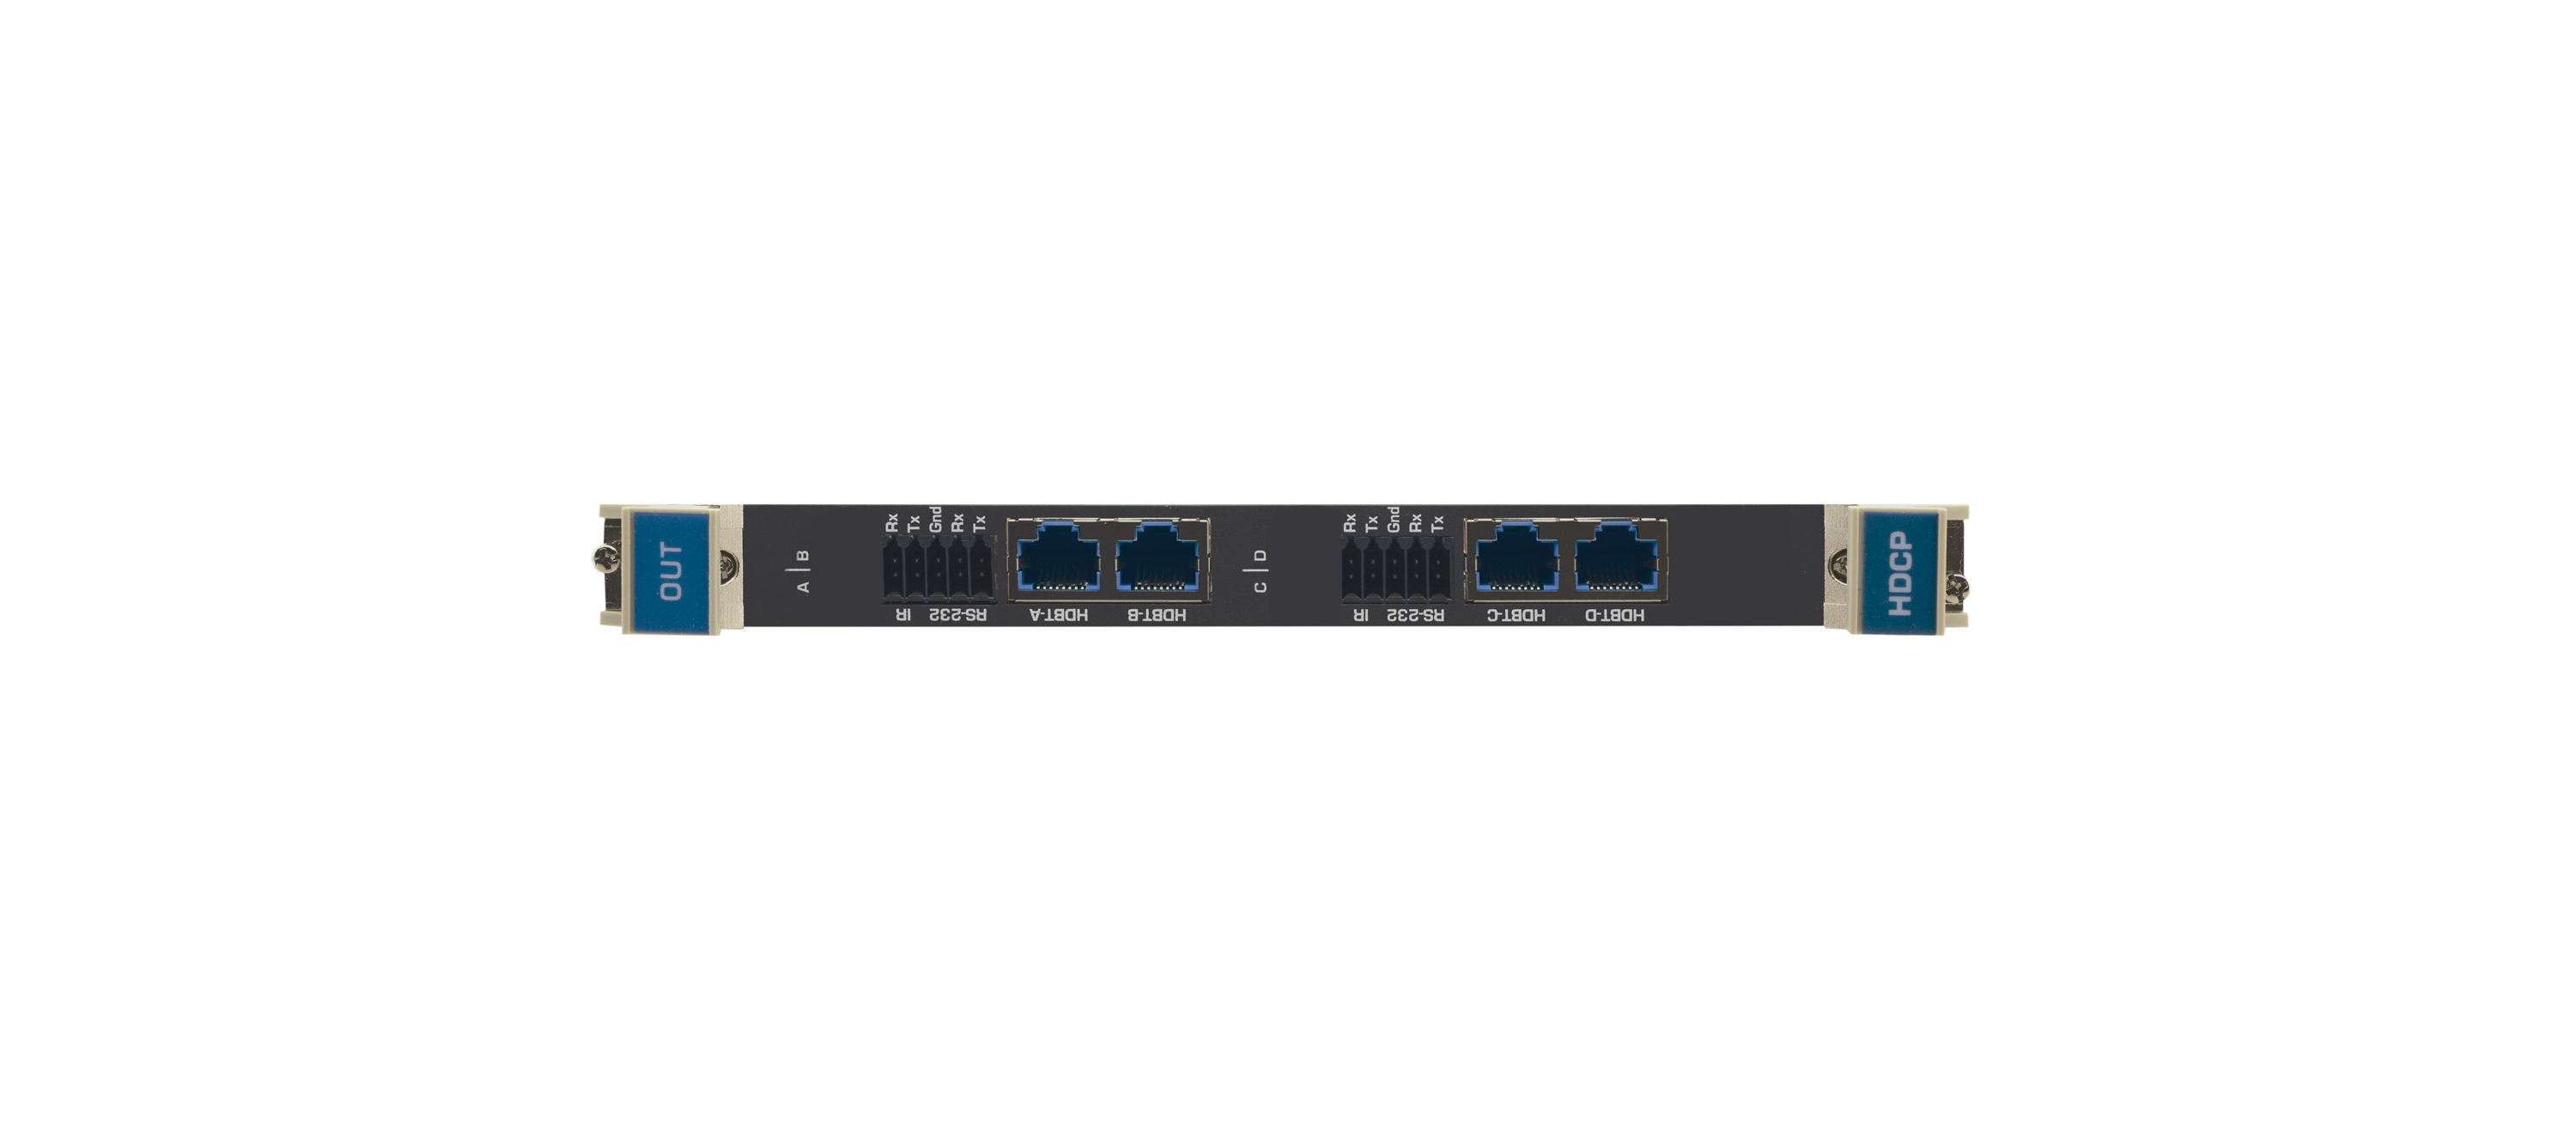 DT-OUT4-F32/STANDALONE 4–Channel 4K60 4:2:0 HDMI over Long Reach HDBaseT Output Card